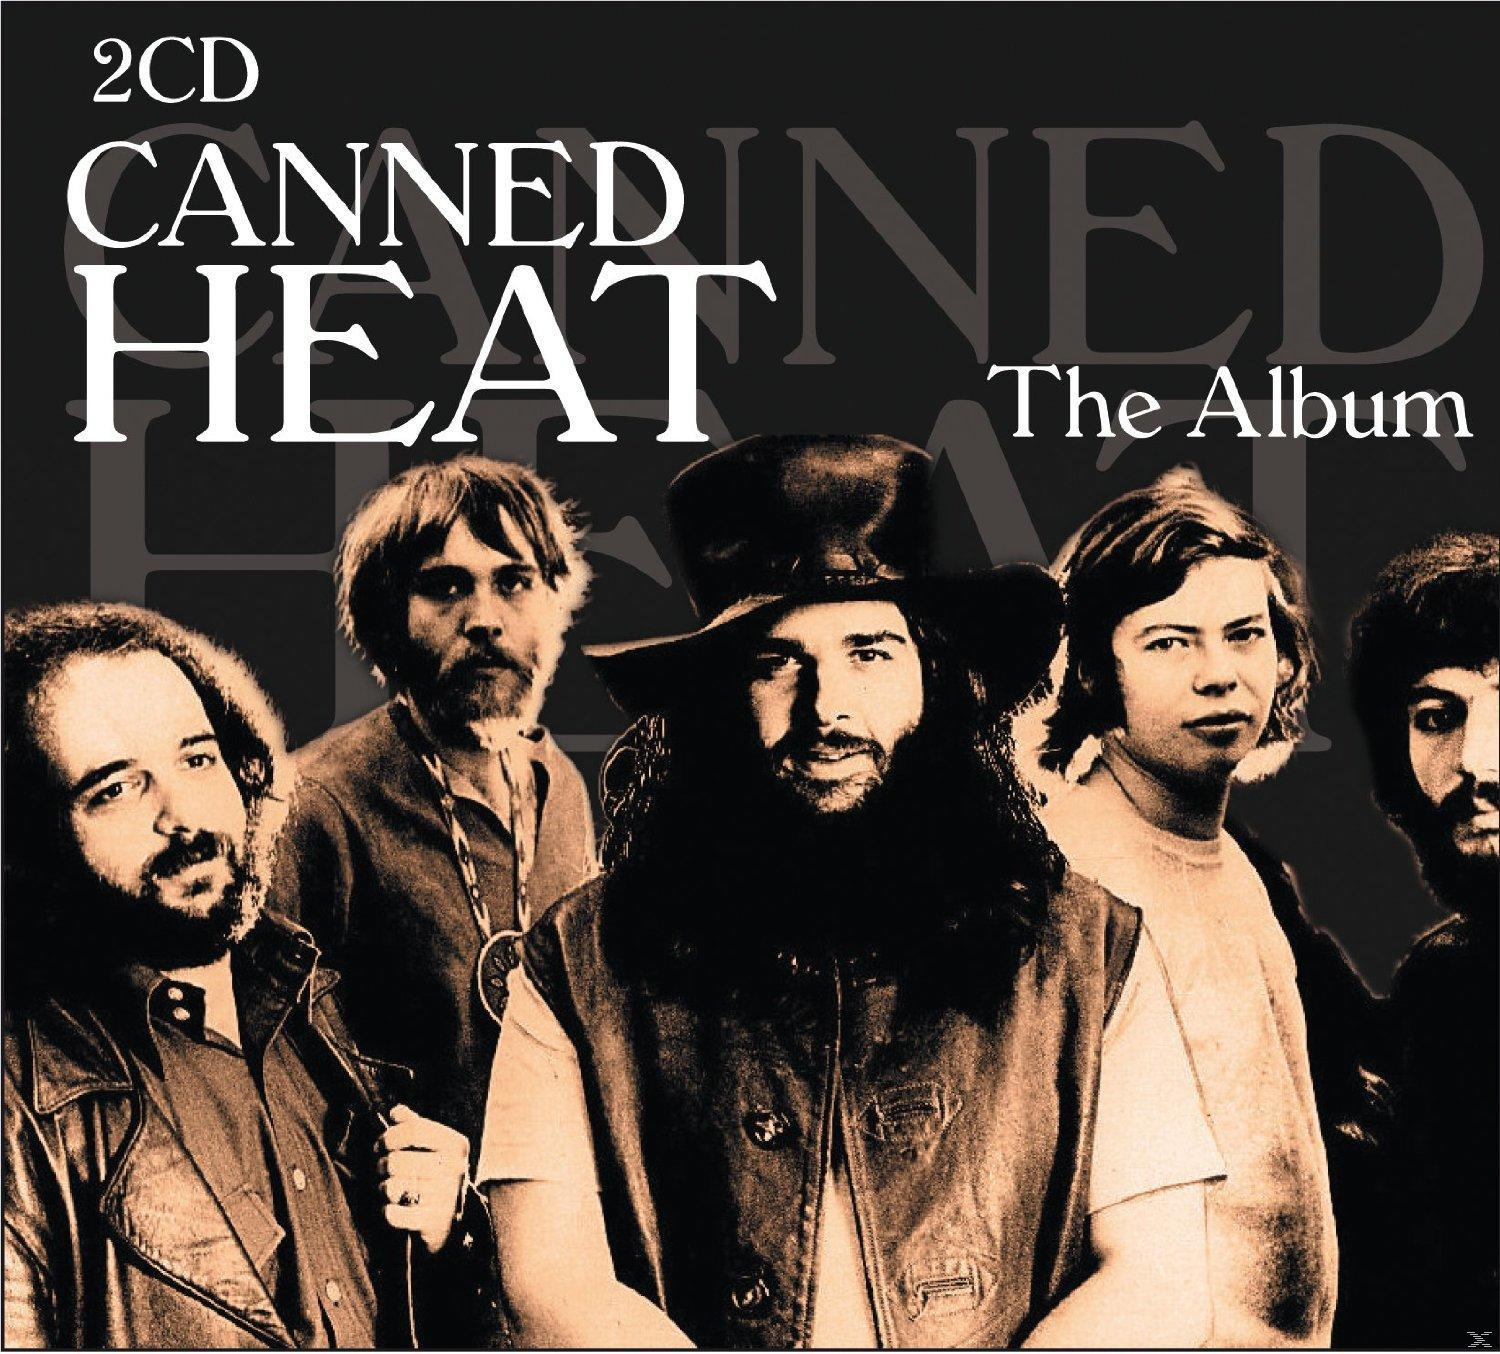 Canned - - Heat Album - The (CD) Heat Canned